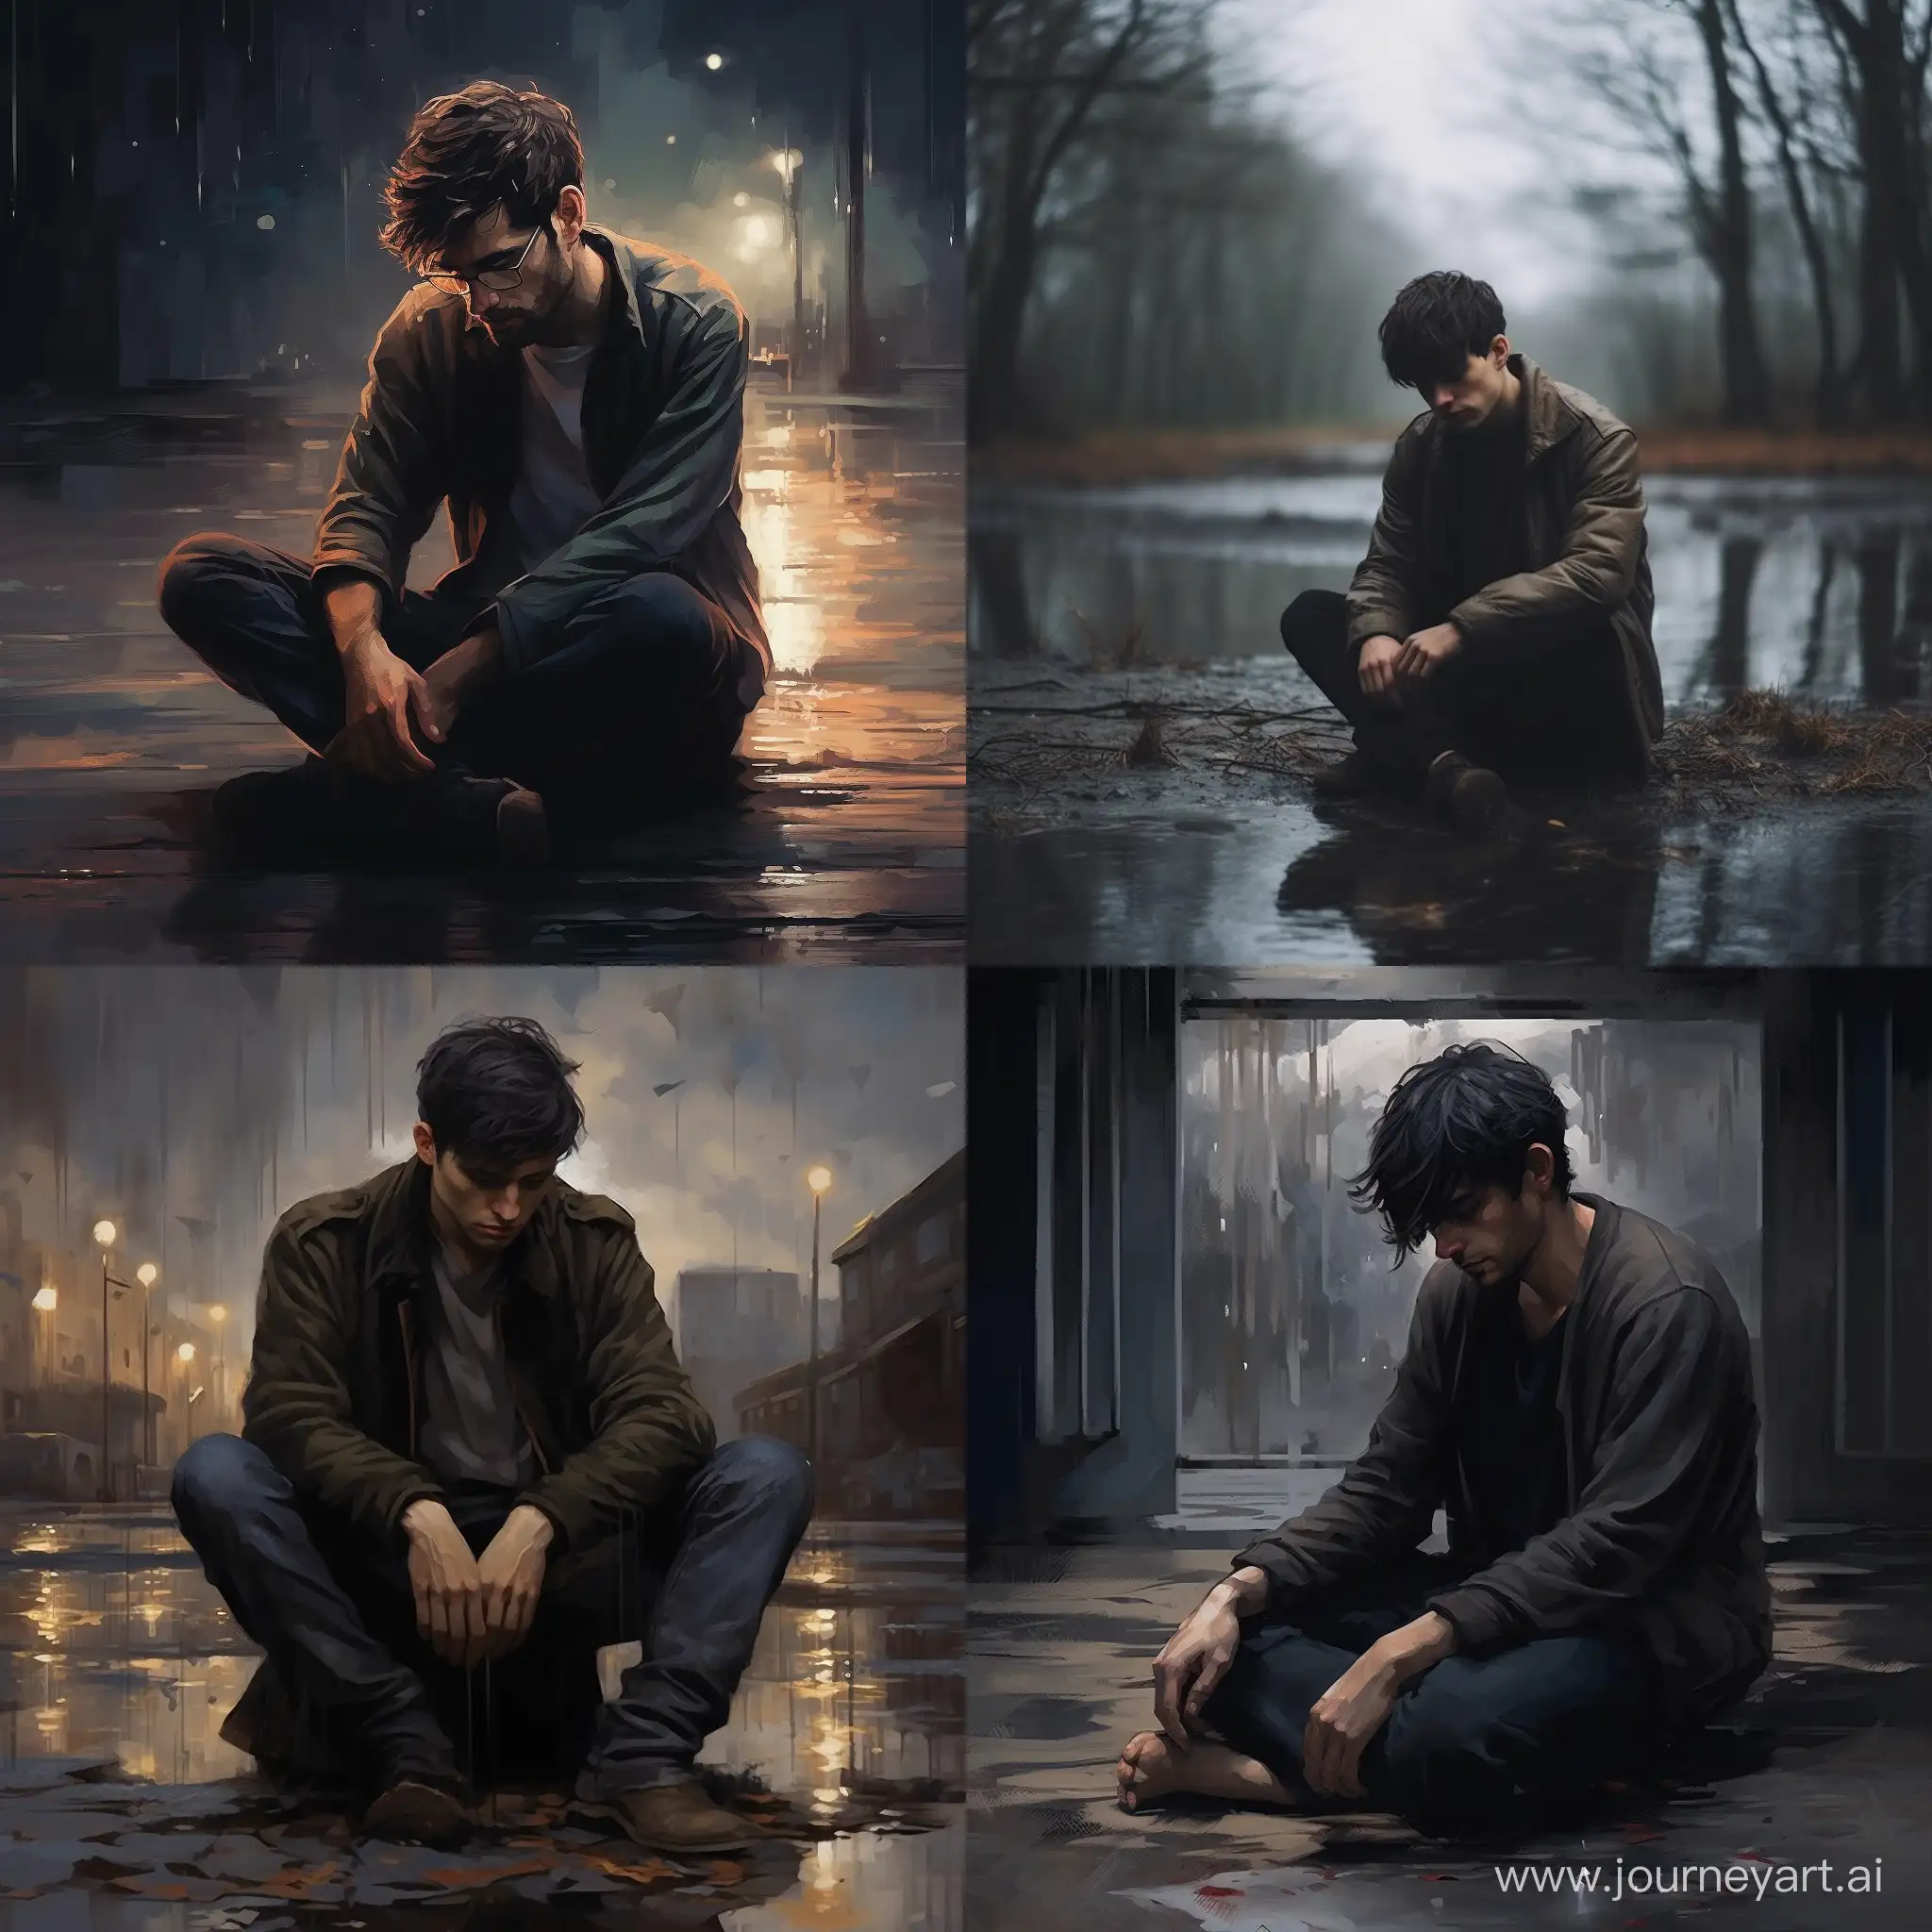 A guy who is sad disheartened  and feels utterly alone and without hope